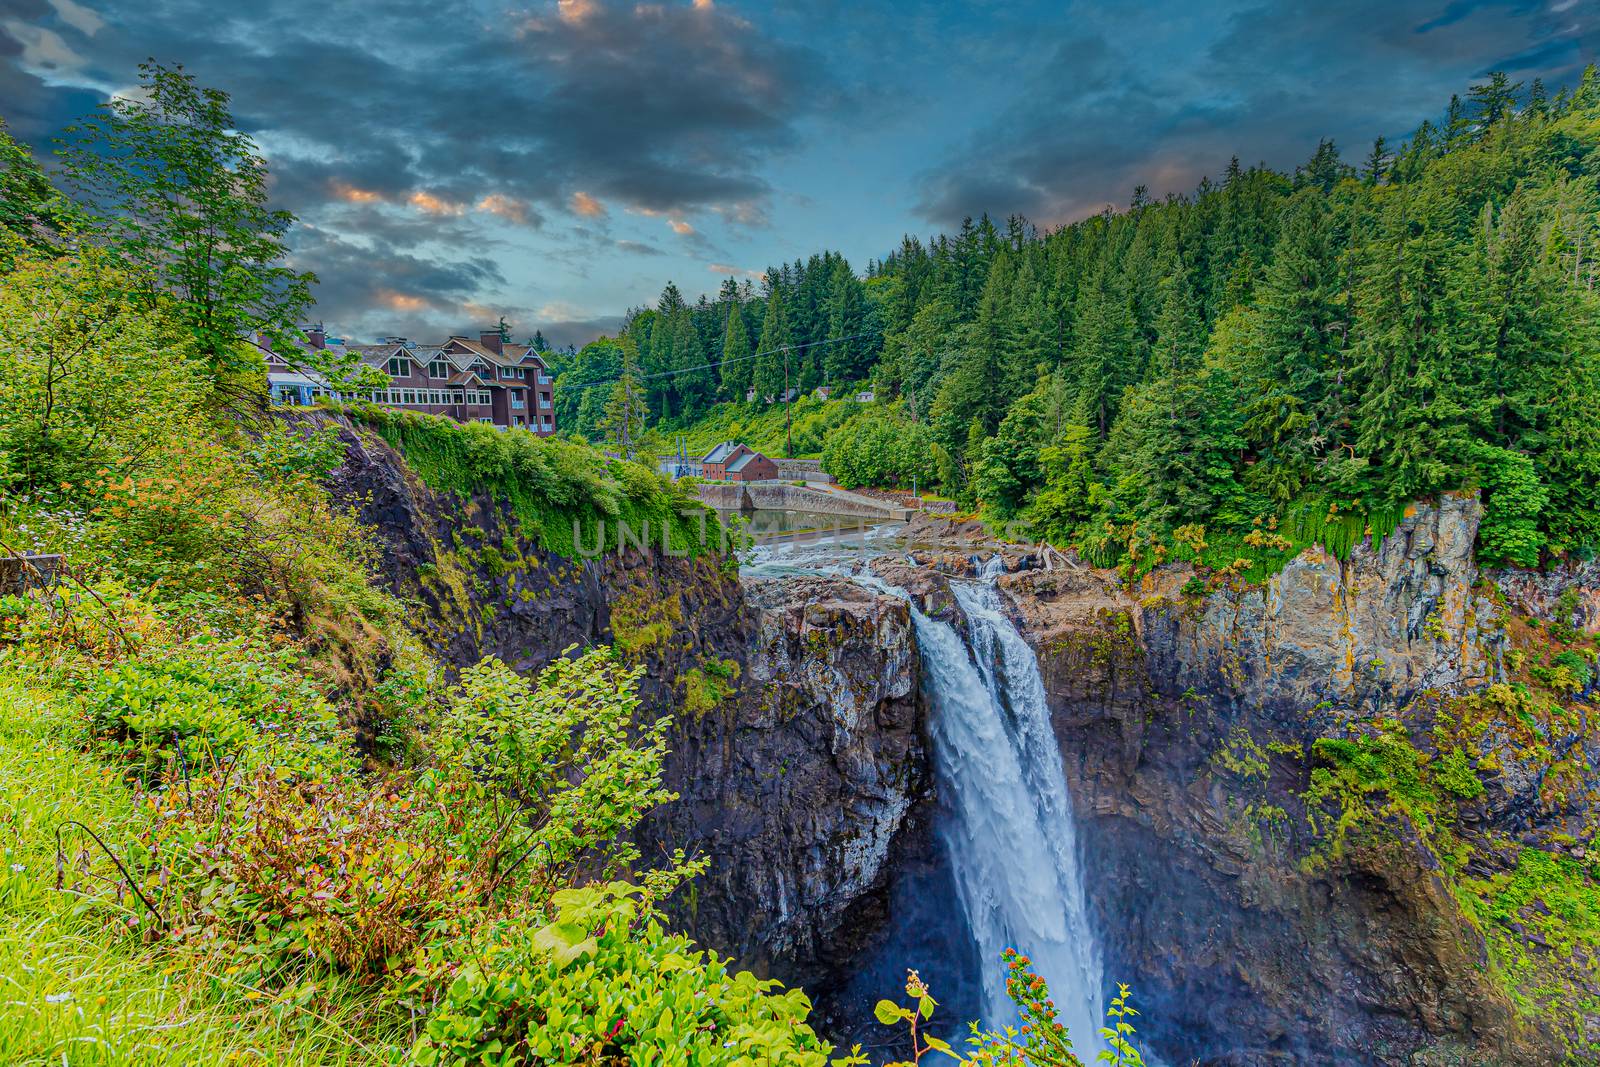 Snoqualmie Lodge and Falls at Sunset by dbvirago